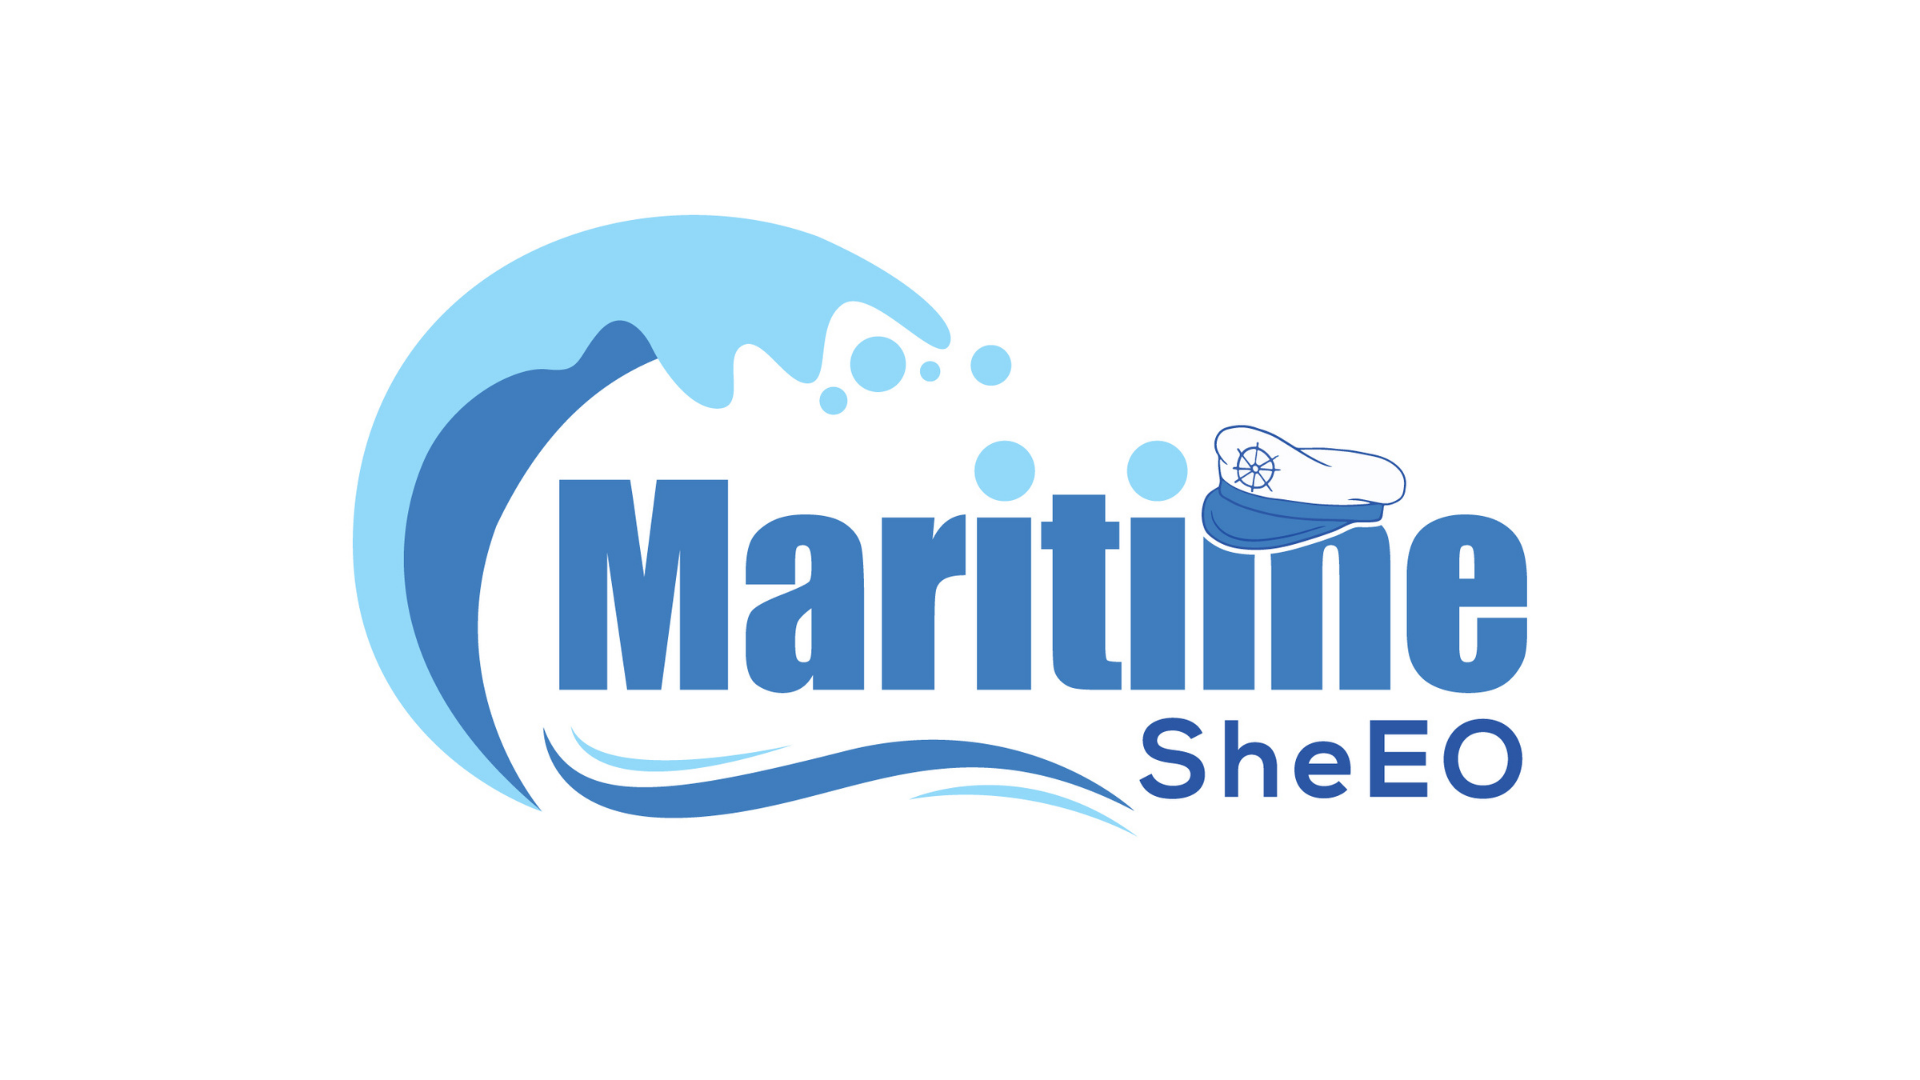 Registration and participation information of the Maritime She-EO conference